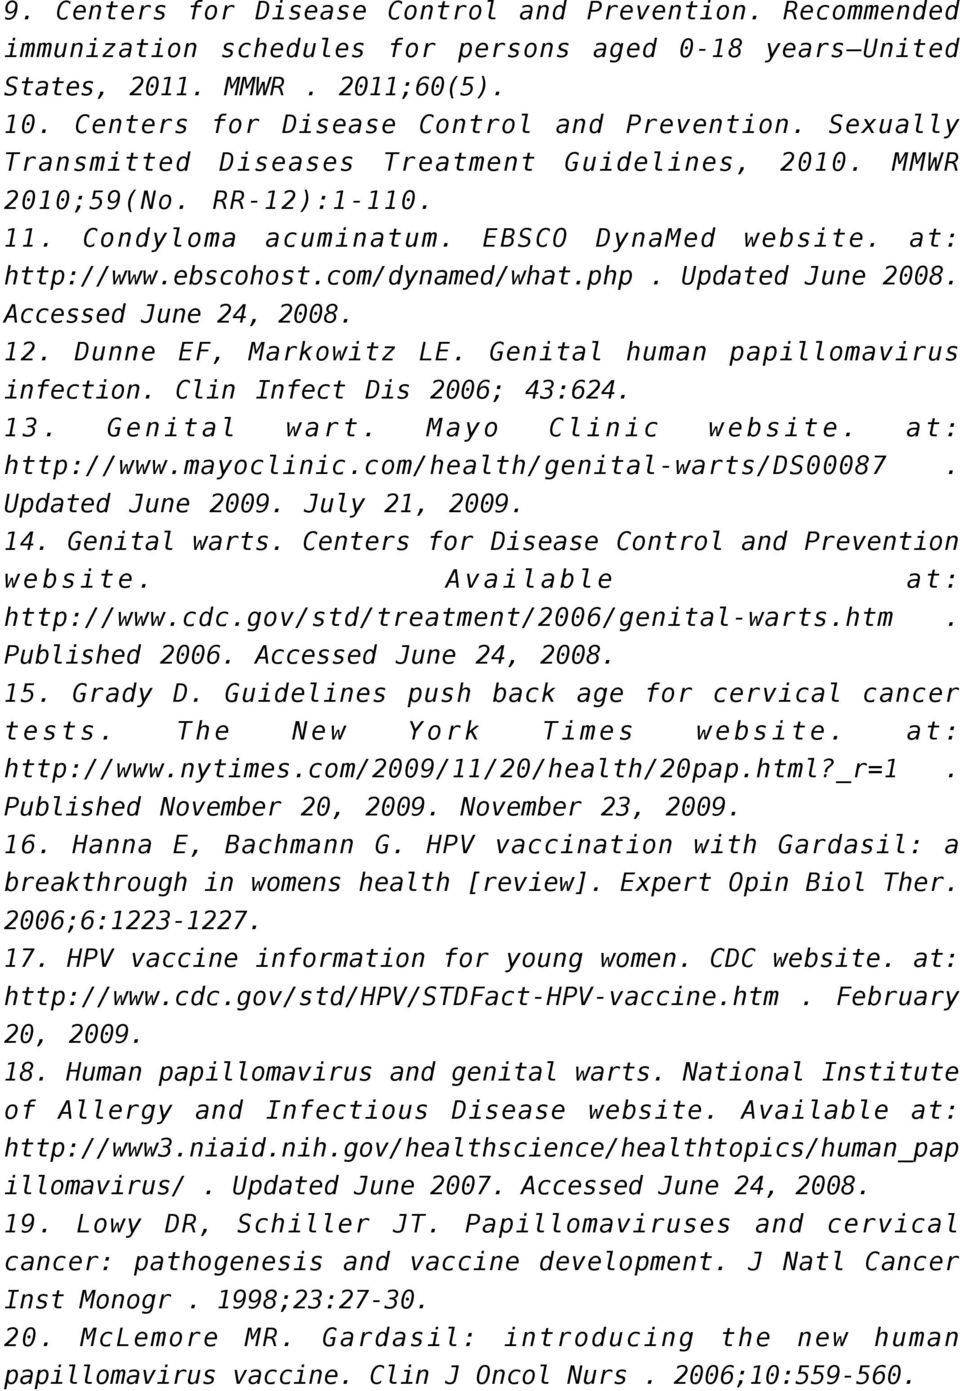 Genital human papillomavirus infection. Clin Infect Dis 2006; 43:624. 13. Genital wart. Mayo Clinic website. at: http://www.mayoclinic.com/health/genital-warts/ds00087. Updated June 2009.